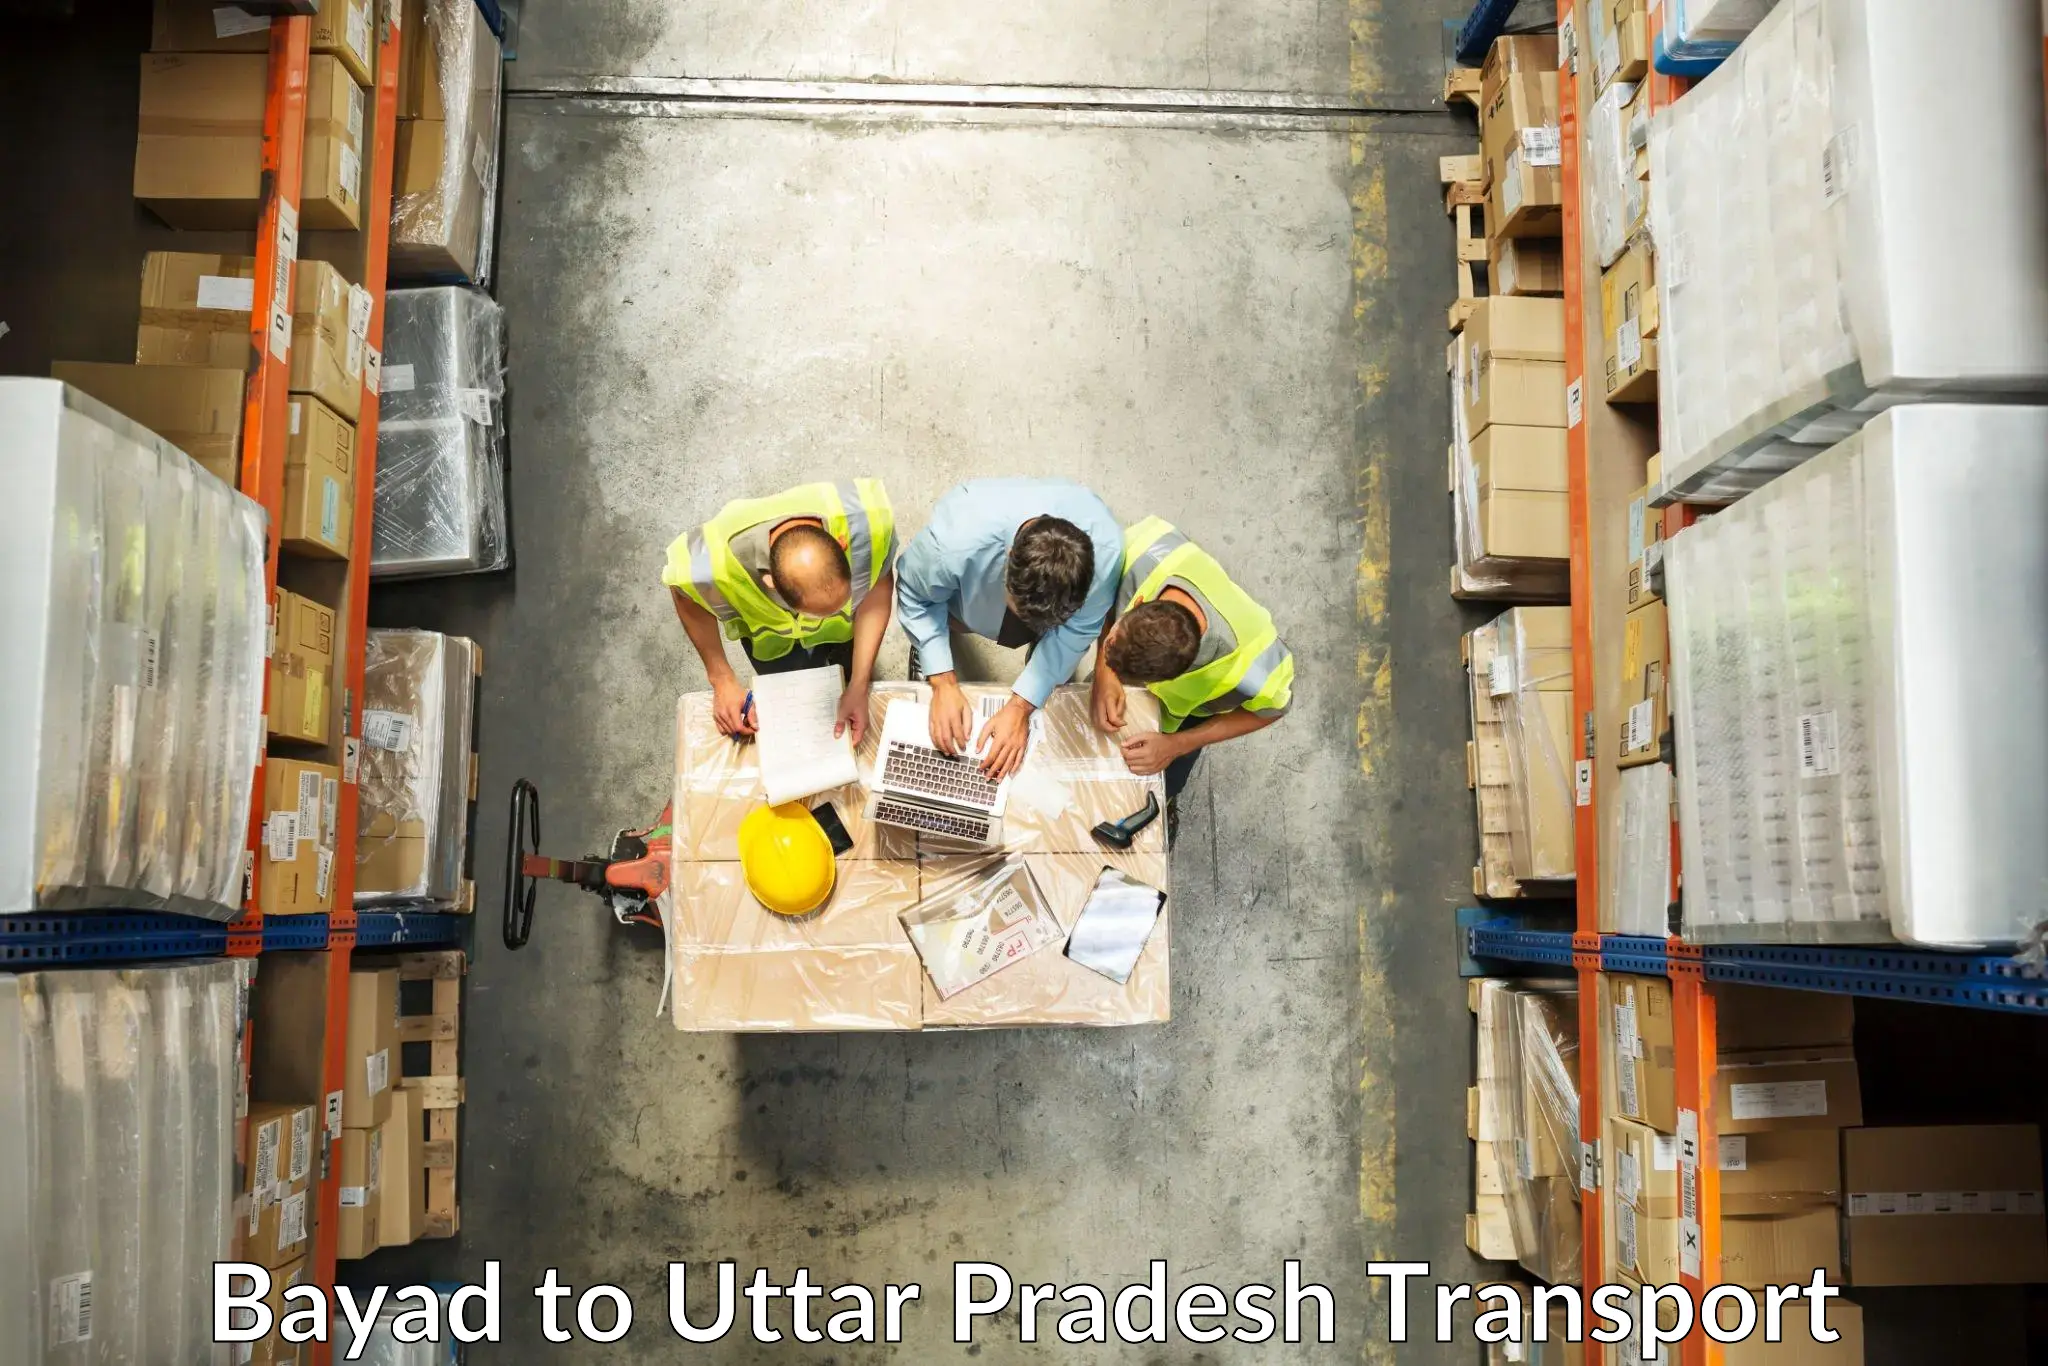 Part load transport service in India Bayad to Firozabad